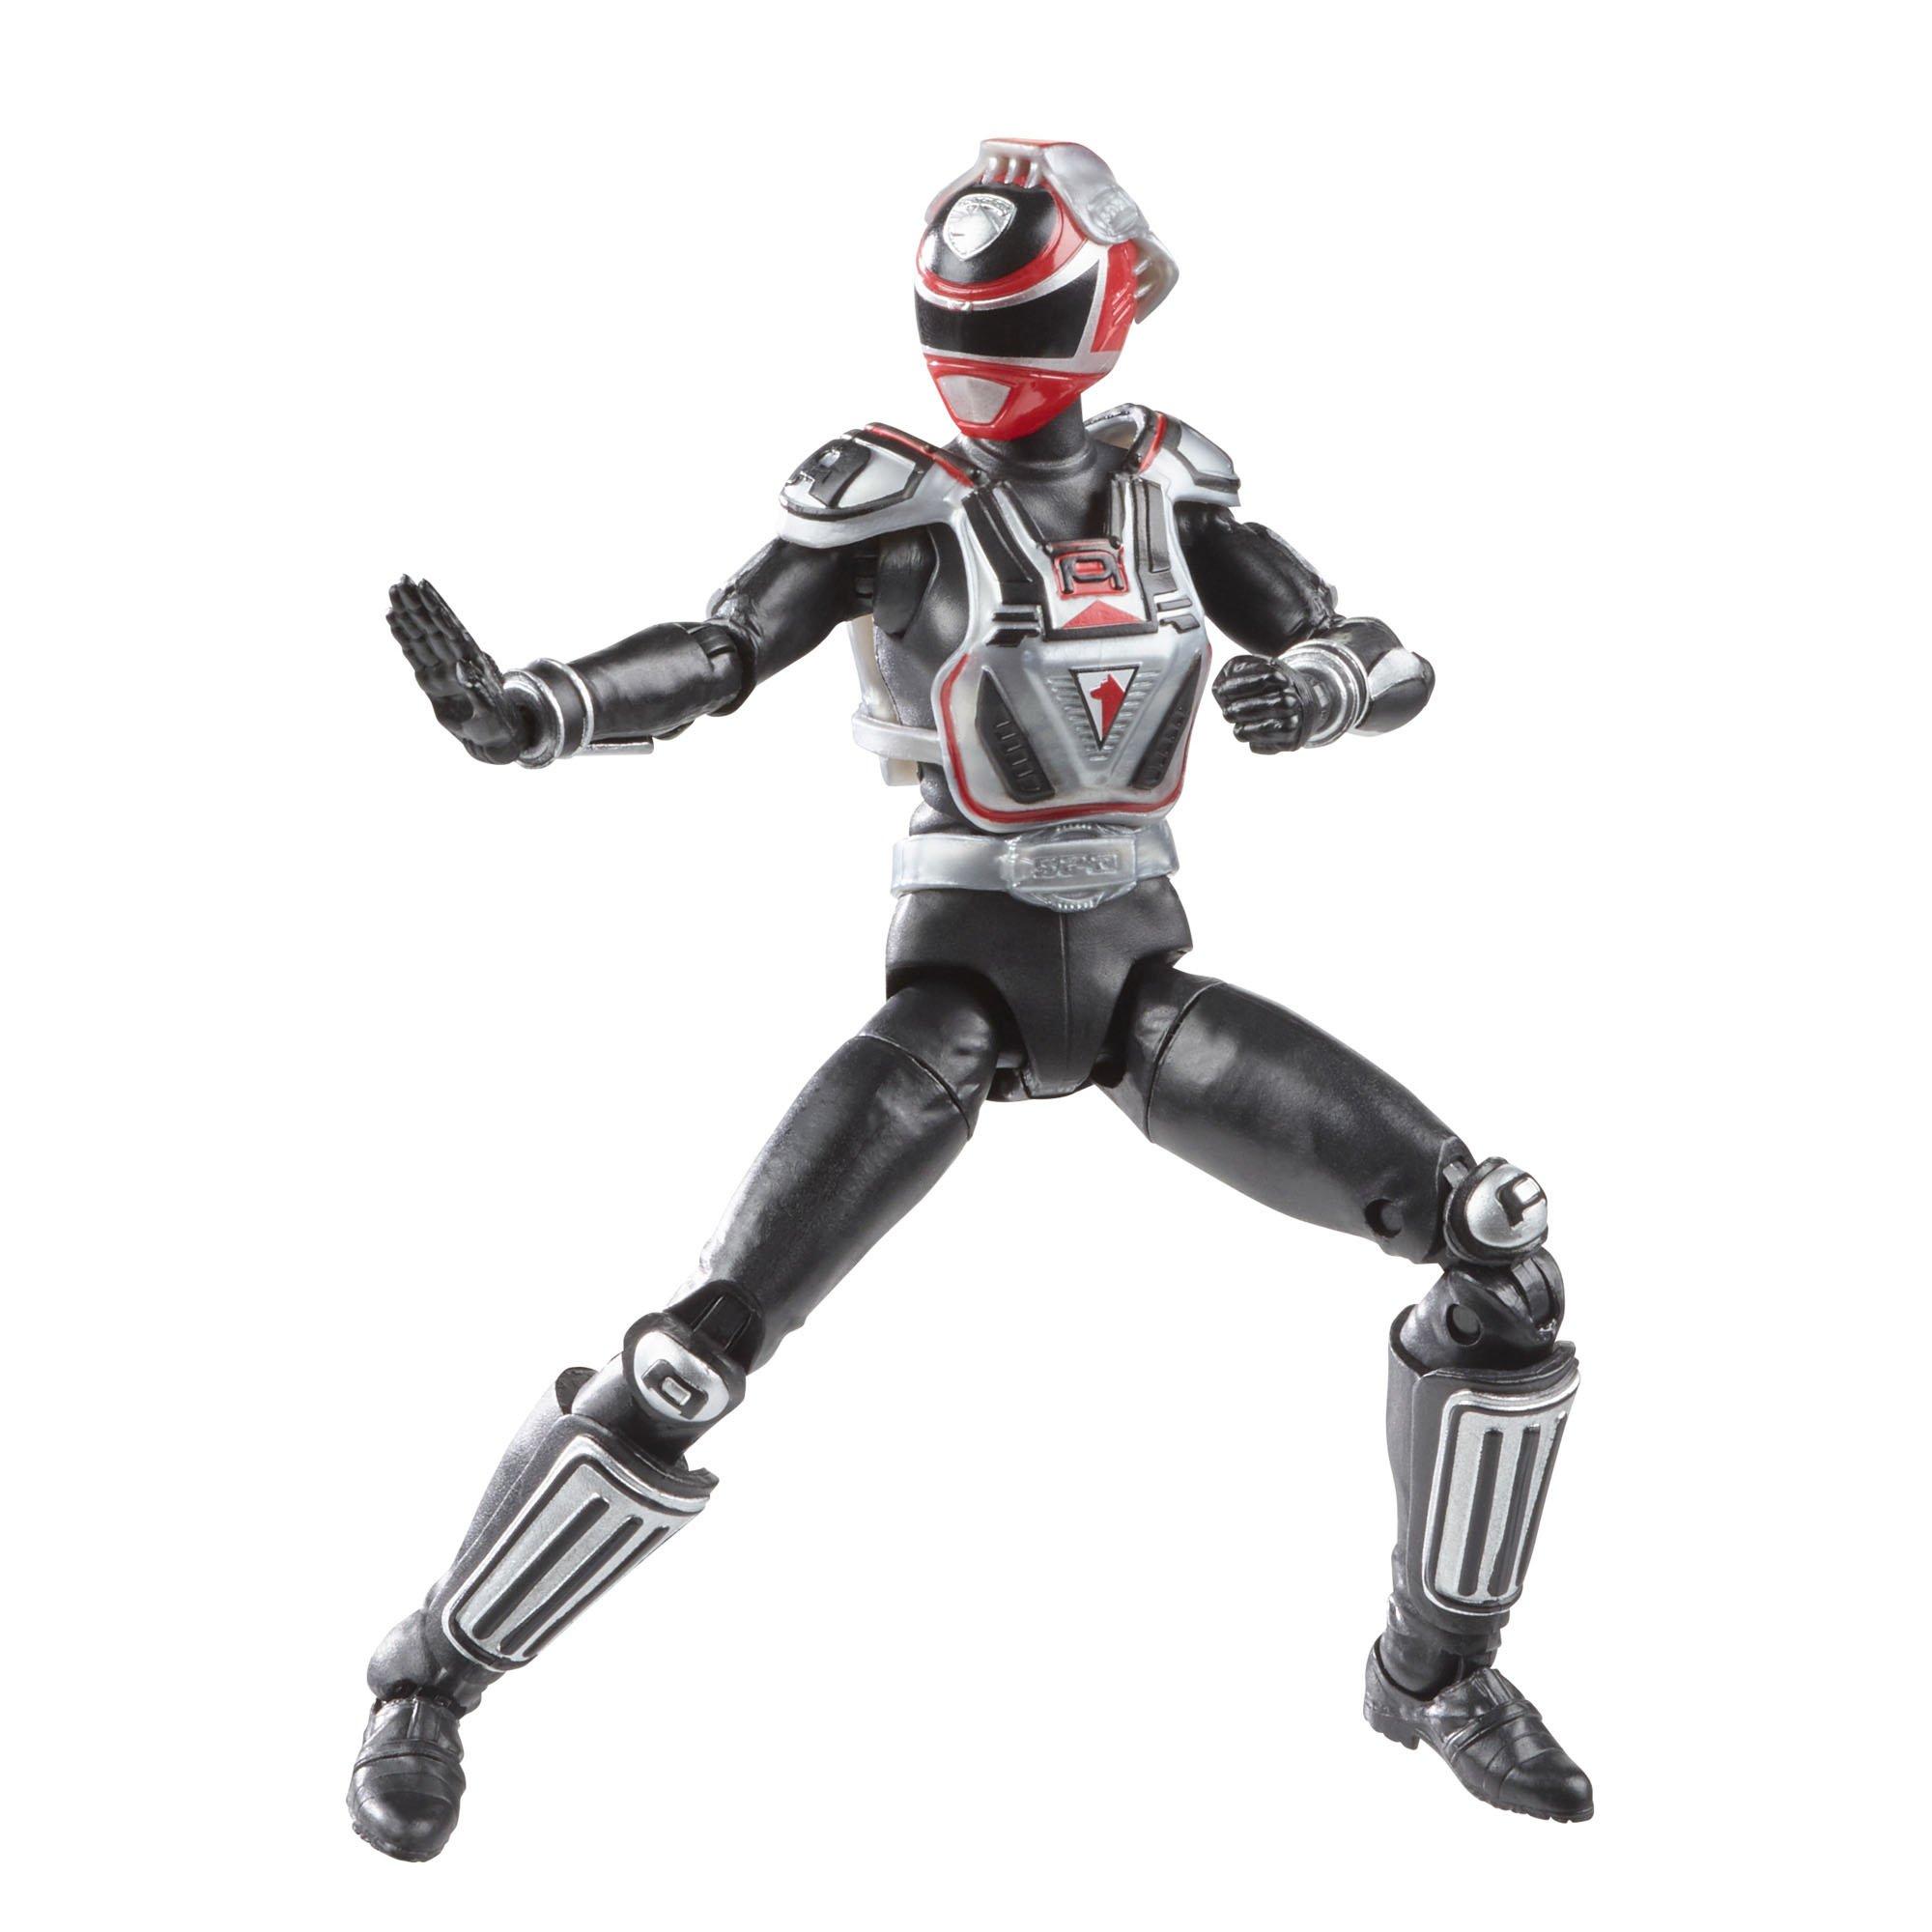 Bandai Power Ranger Mighty Morphin Power Up Red Ranger Action Figure for sale online 